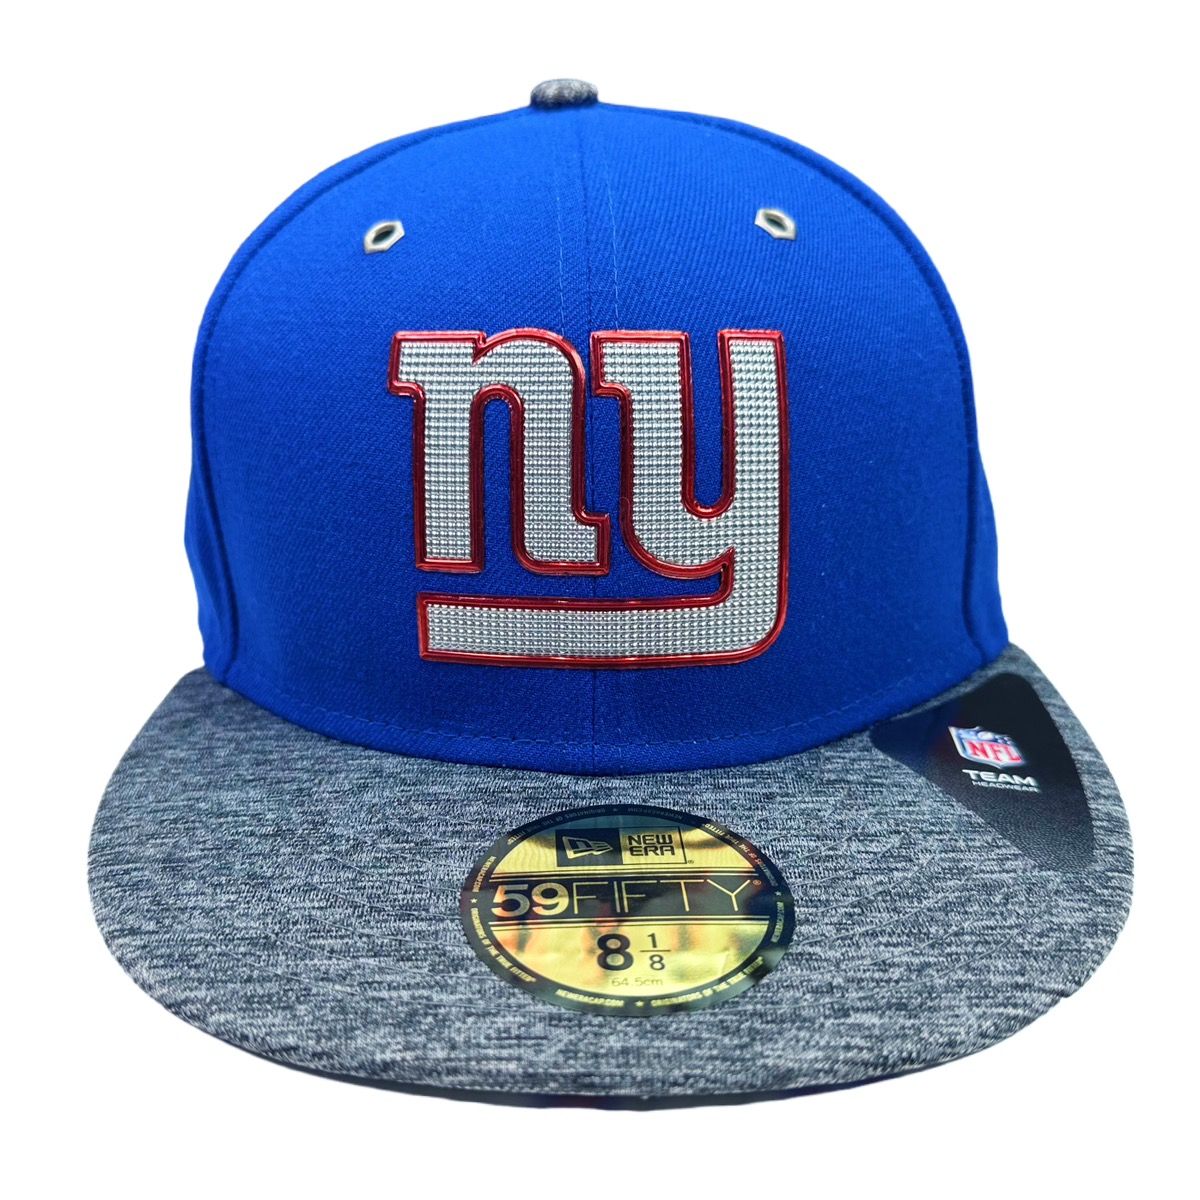 New Era New Era 59Fifty NFL New York Giants Fitted Hat | Grailed